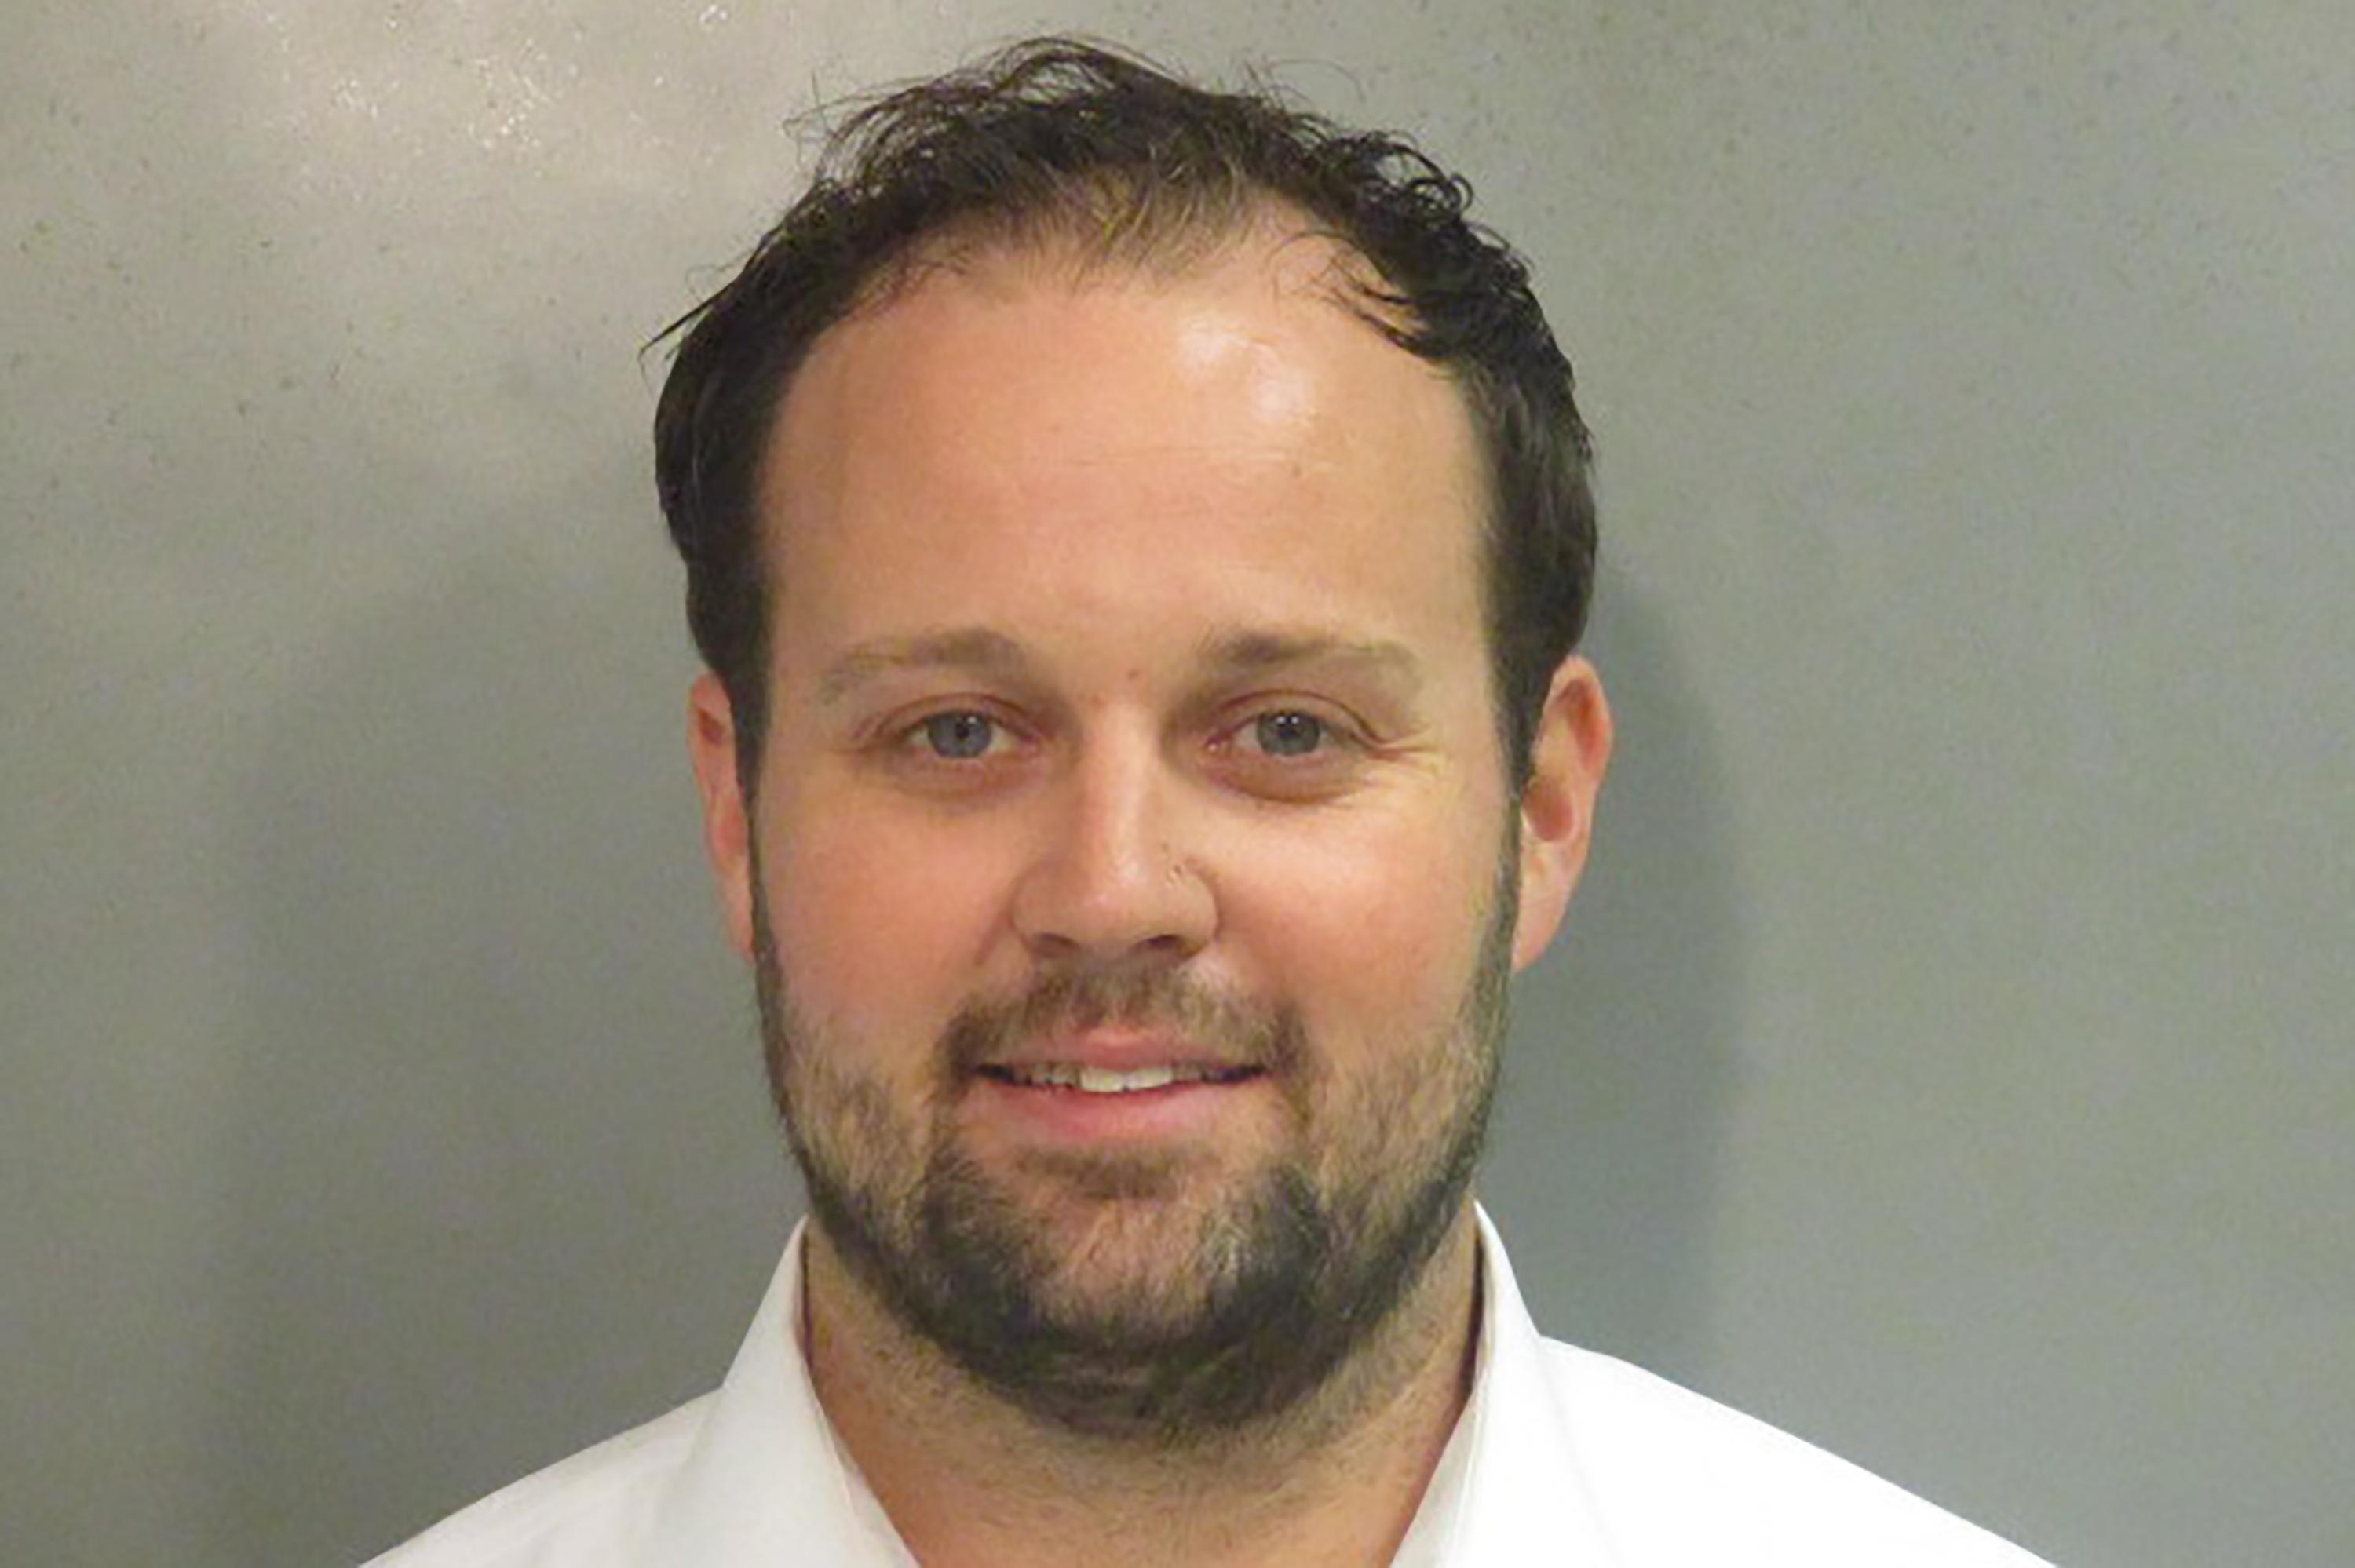 Fast Time Sxe 12yers Xxx Com - Reality TV's Josh Duggar gets 12 years in child porn case | AP News